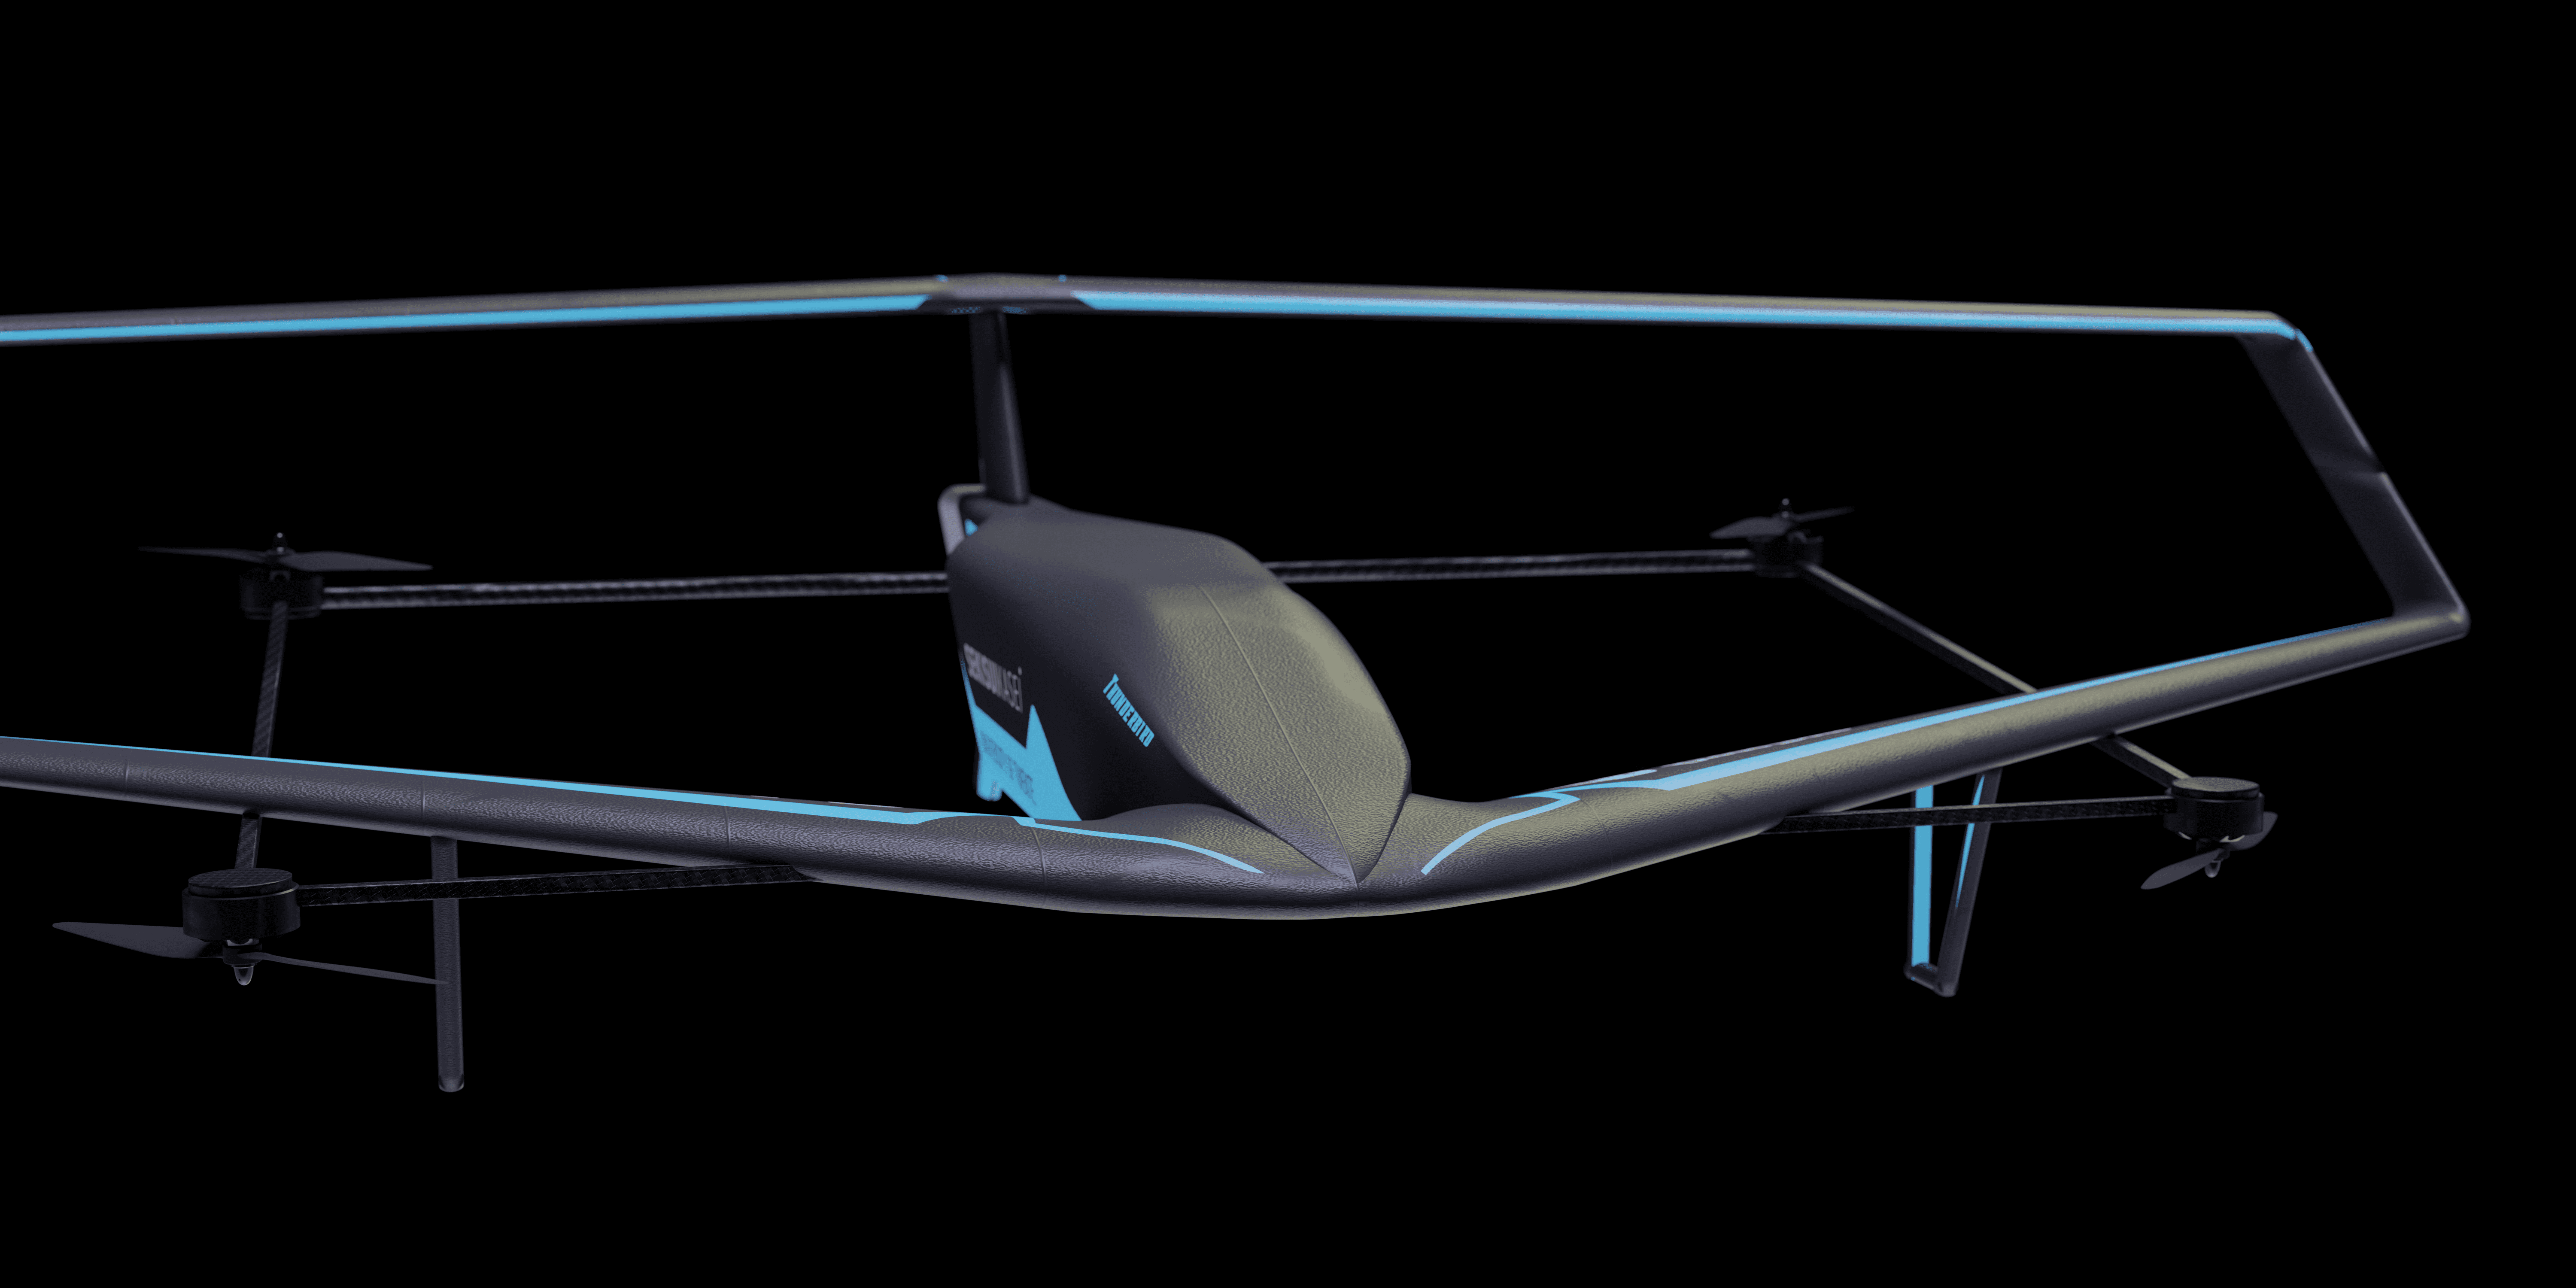 Thunderbird: a unique drone designed for disaster areas